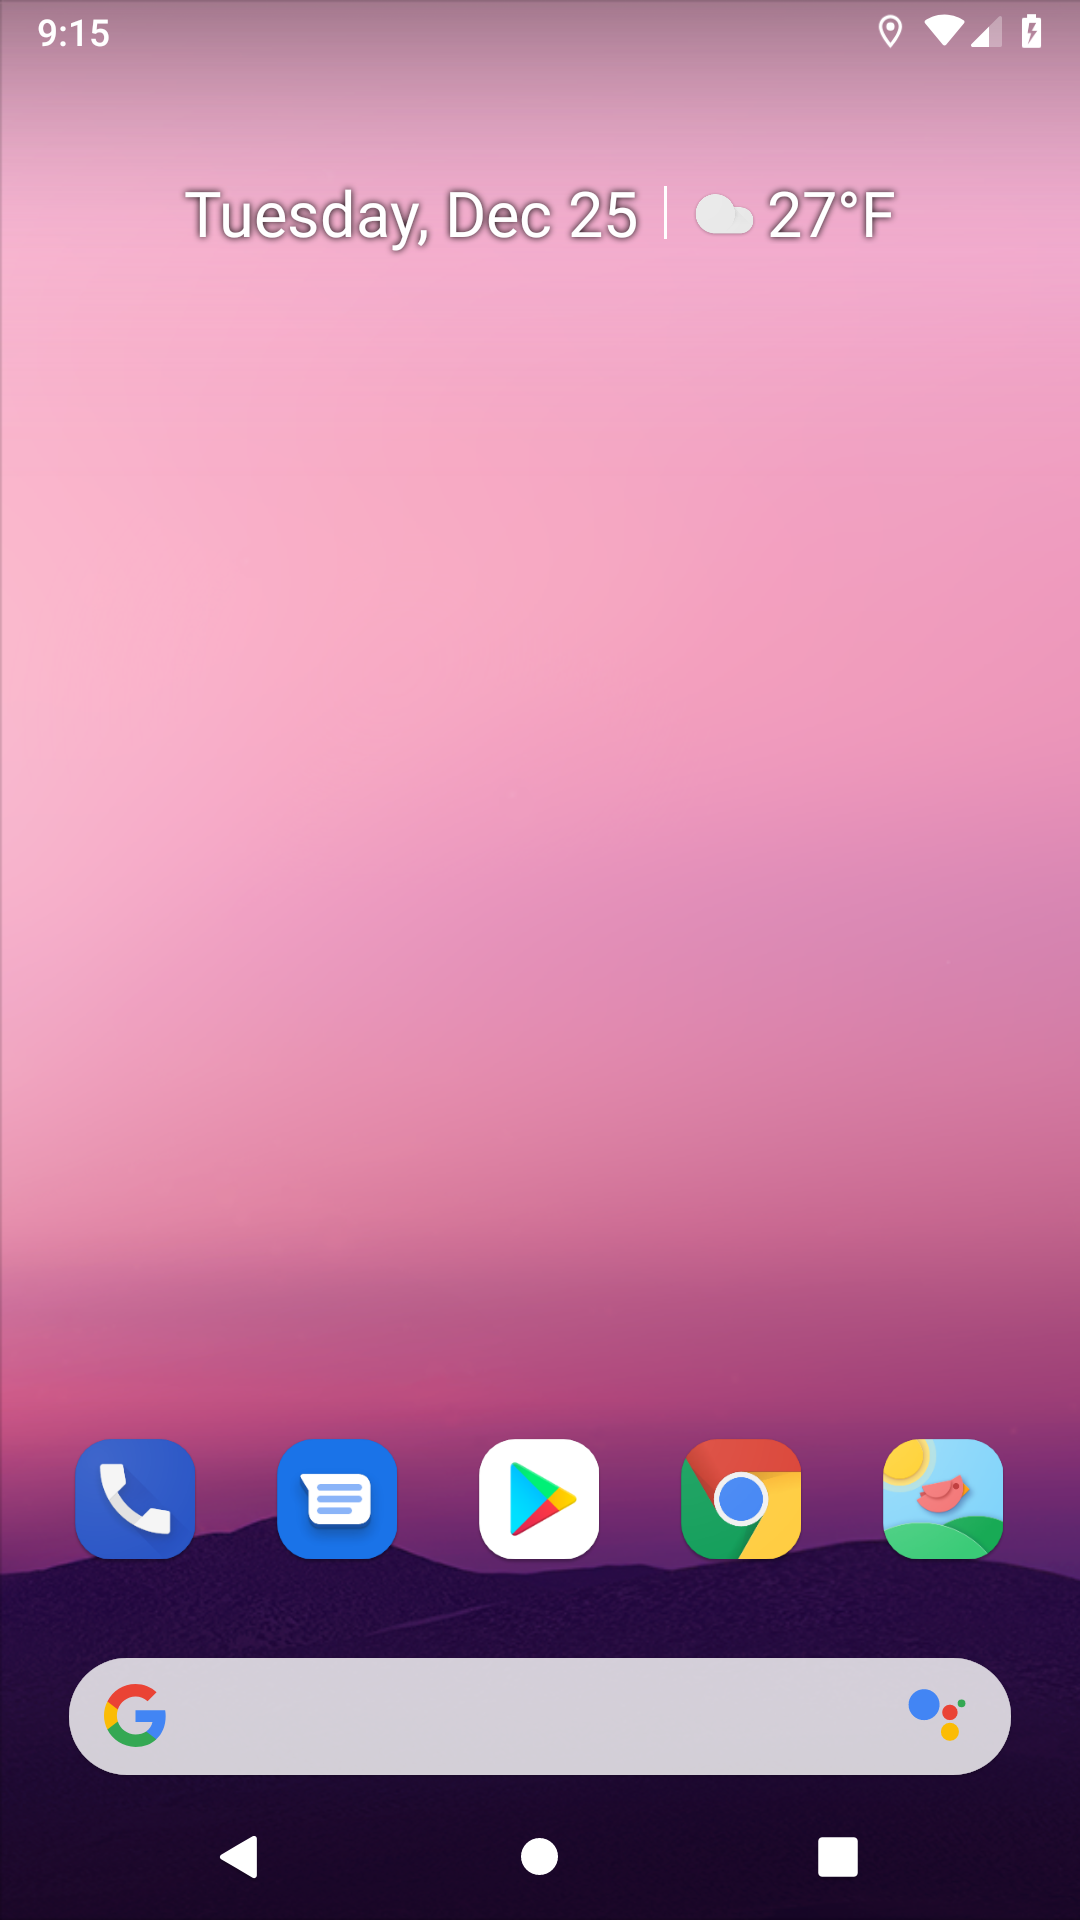 Birb logo on Android home screen